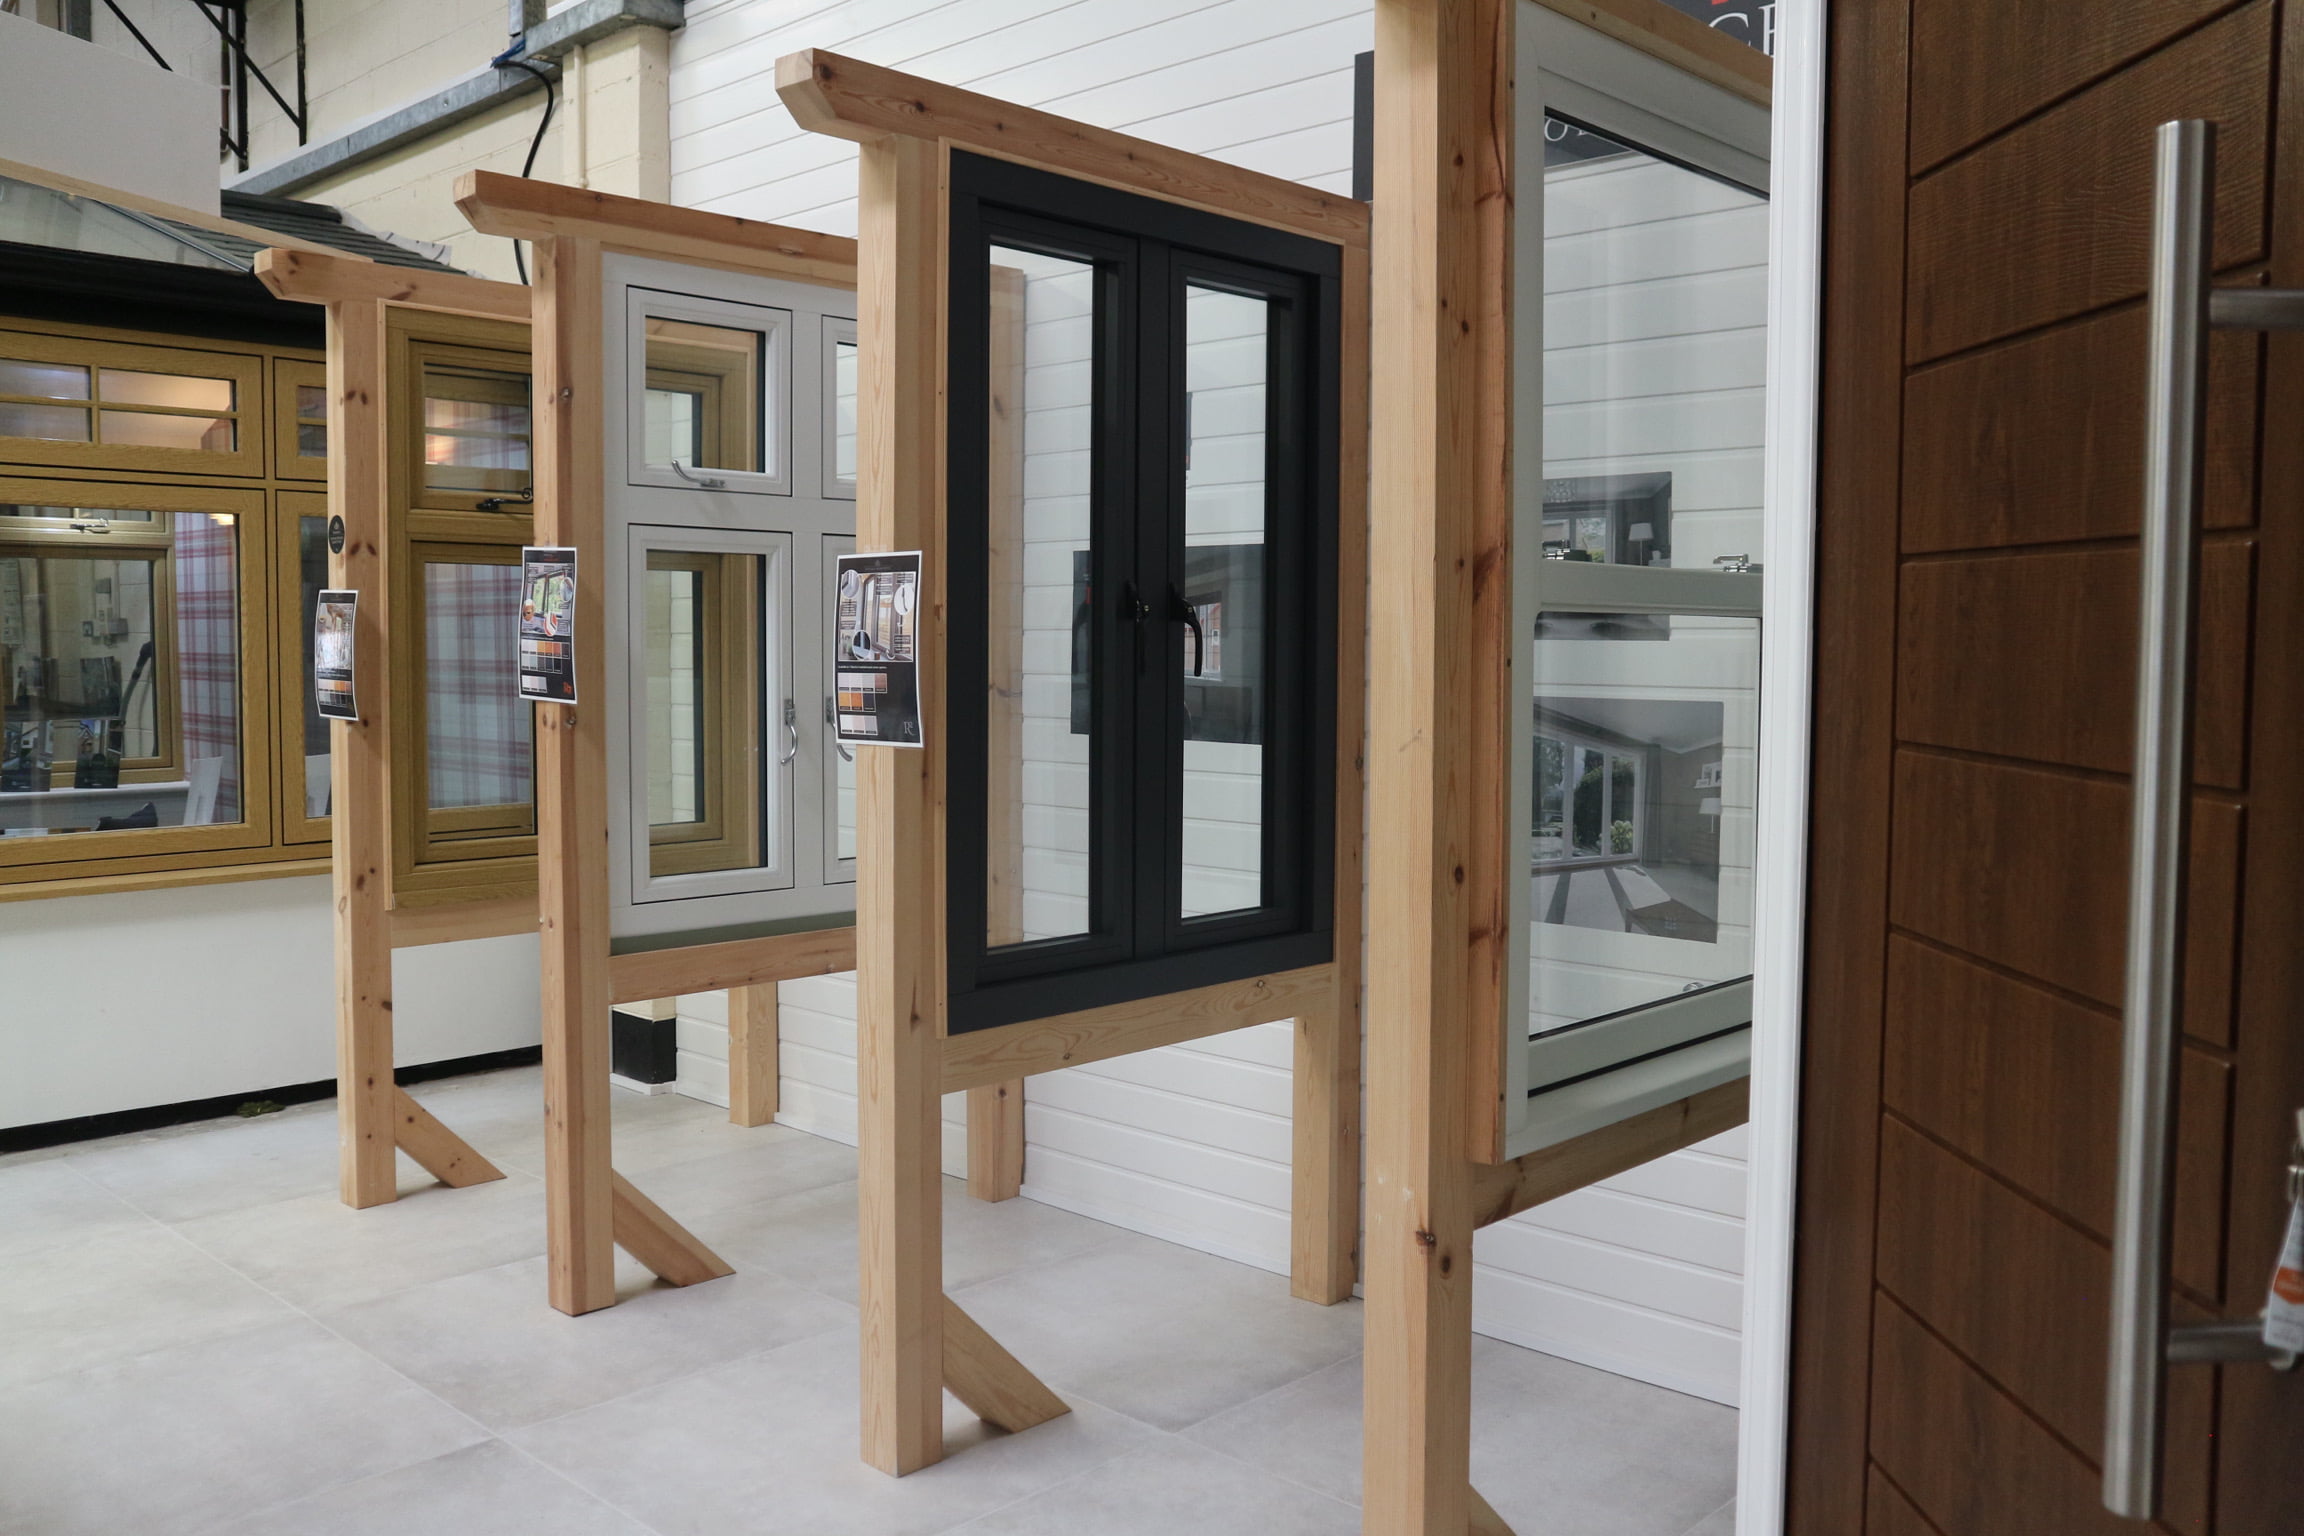 Wholesale Windows Showroom-contact us for more information